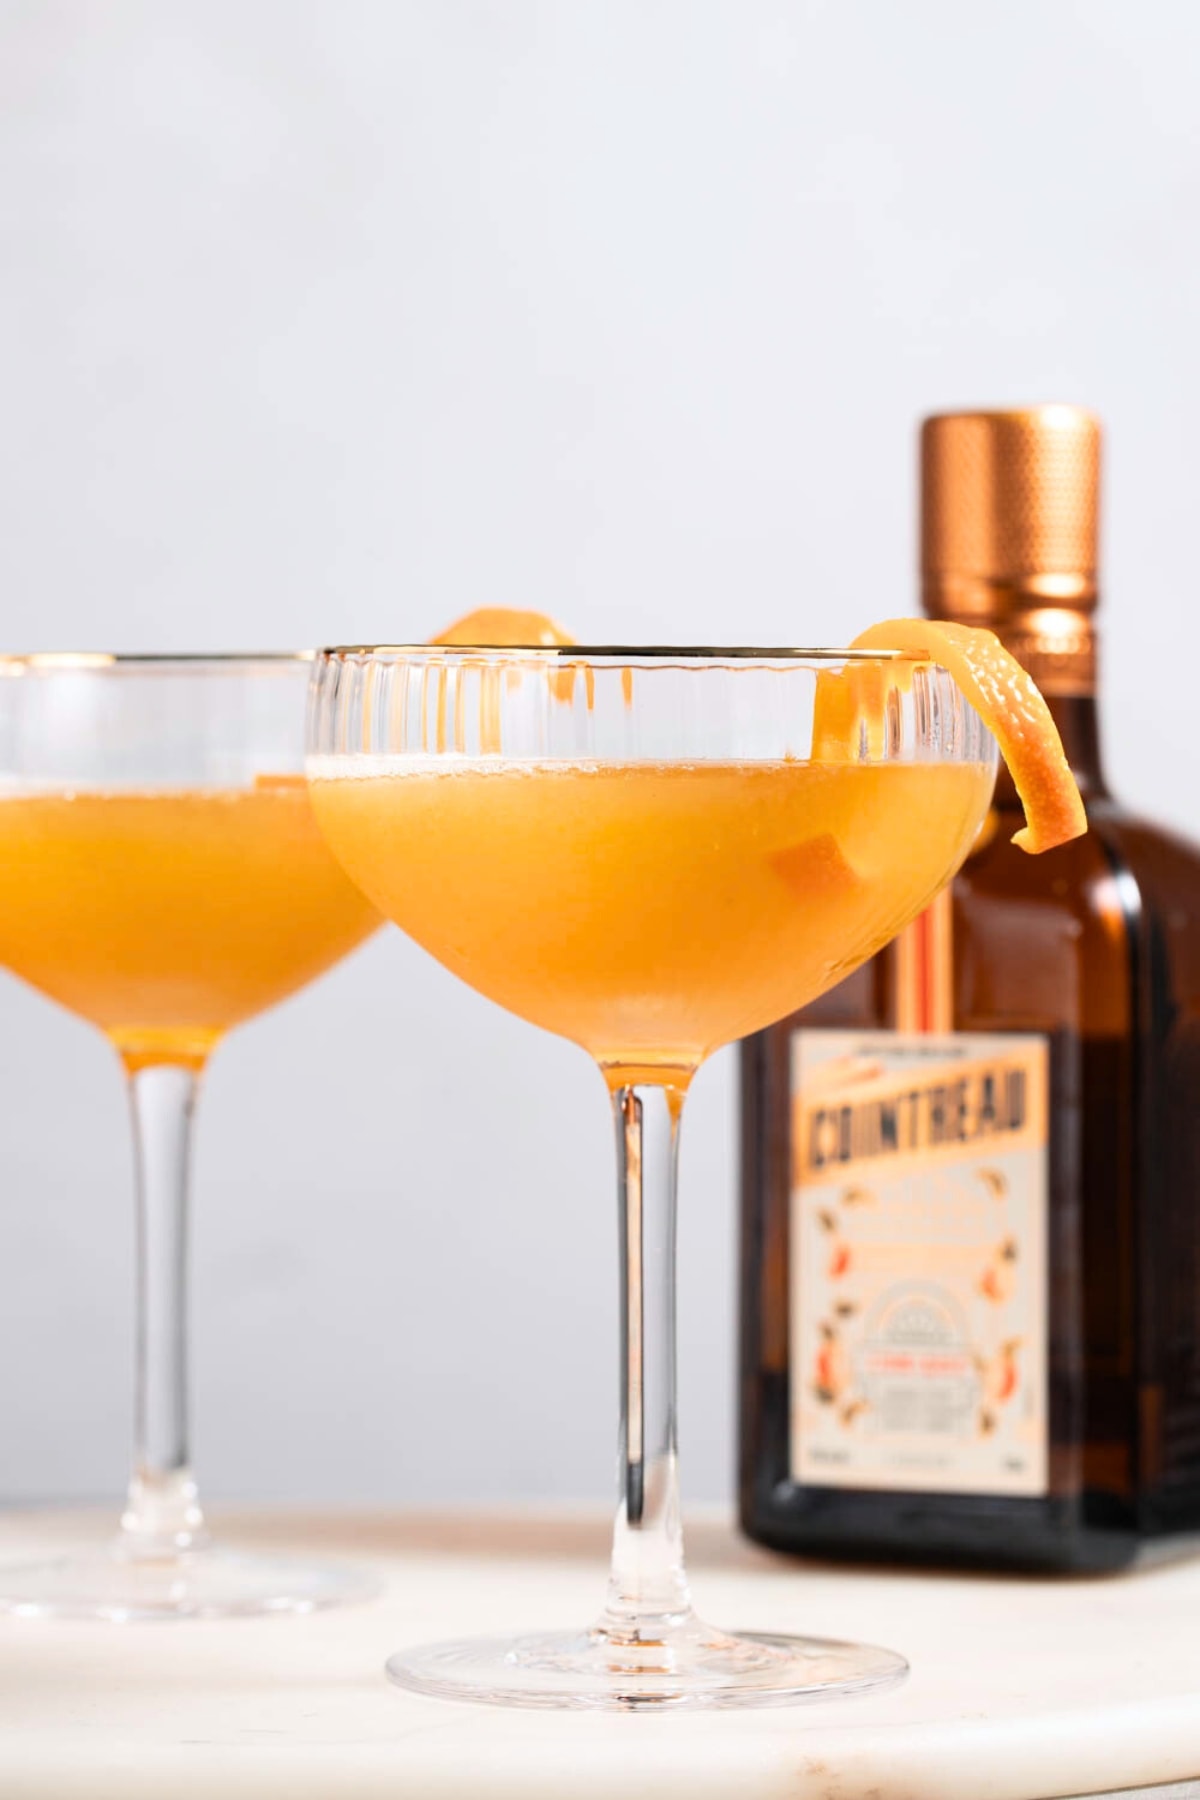 Two glasses of sidecar cocktail garnished with orange peel